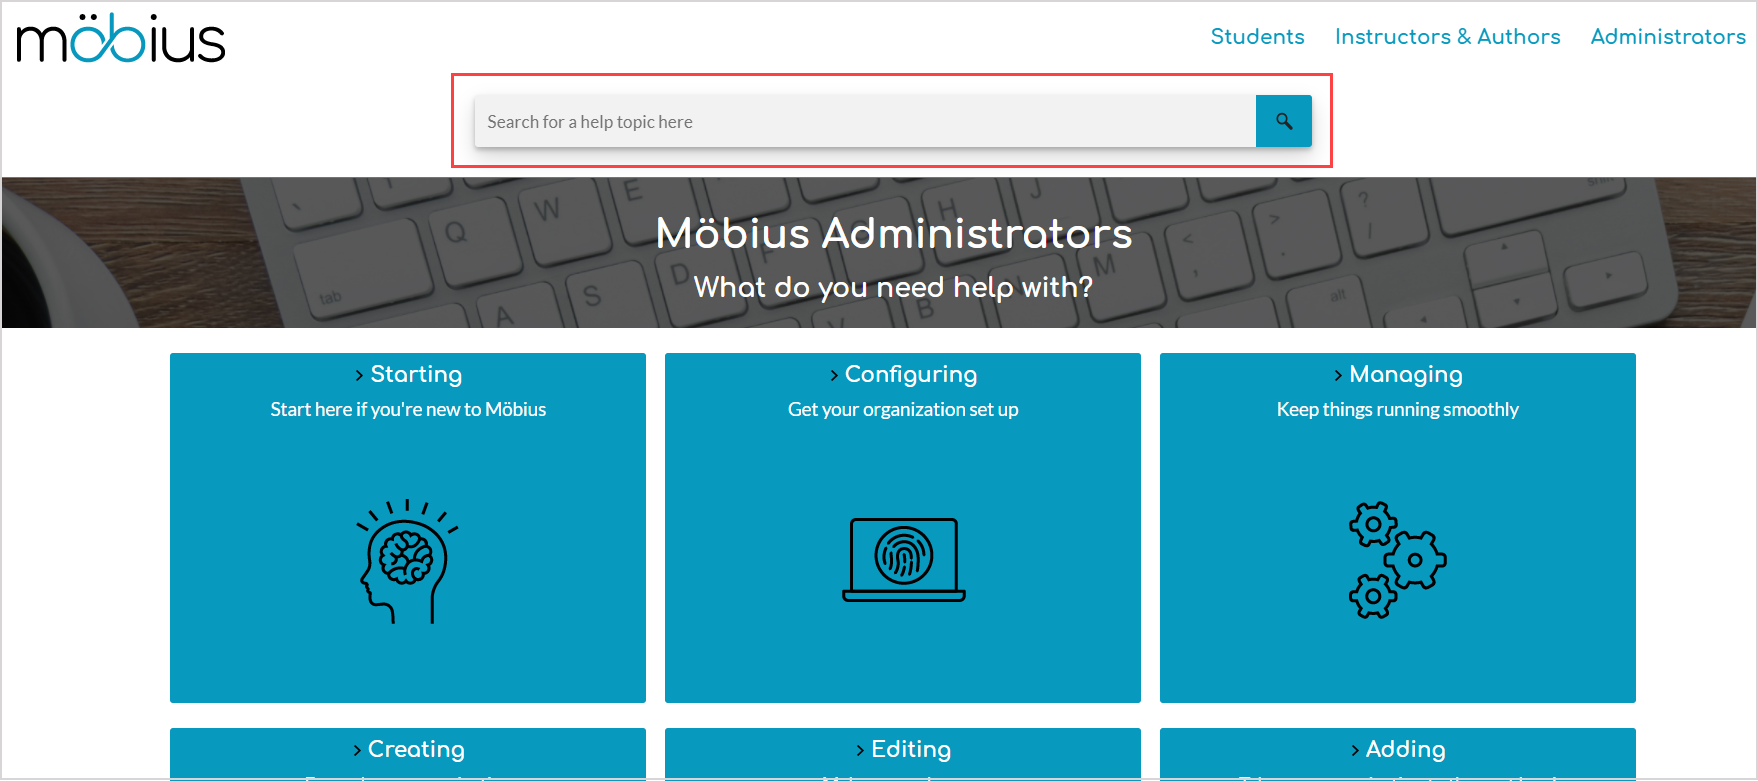 There's a search bar at the top of the Mobius Administrator Online Help page.